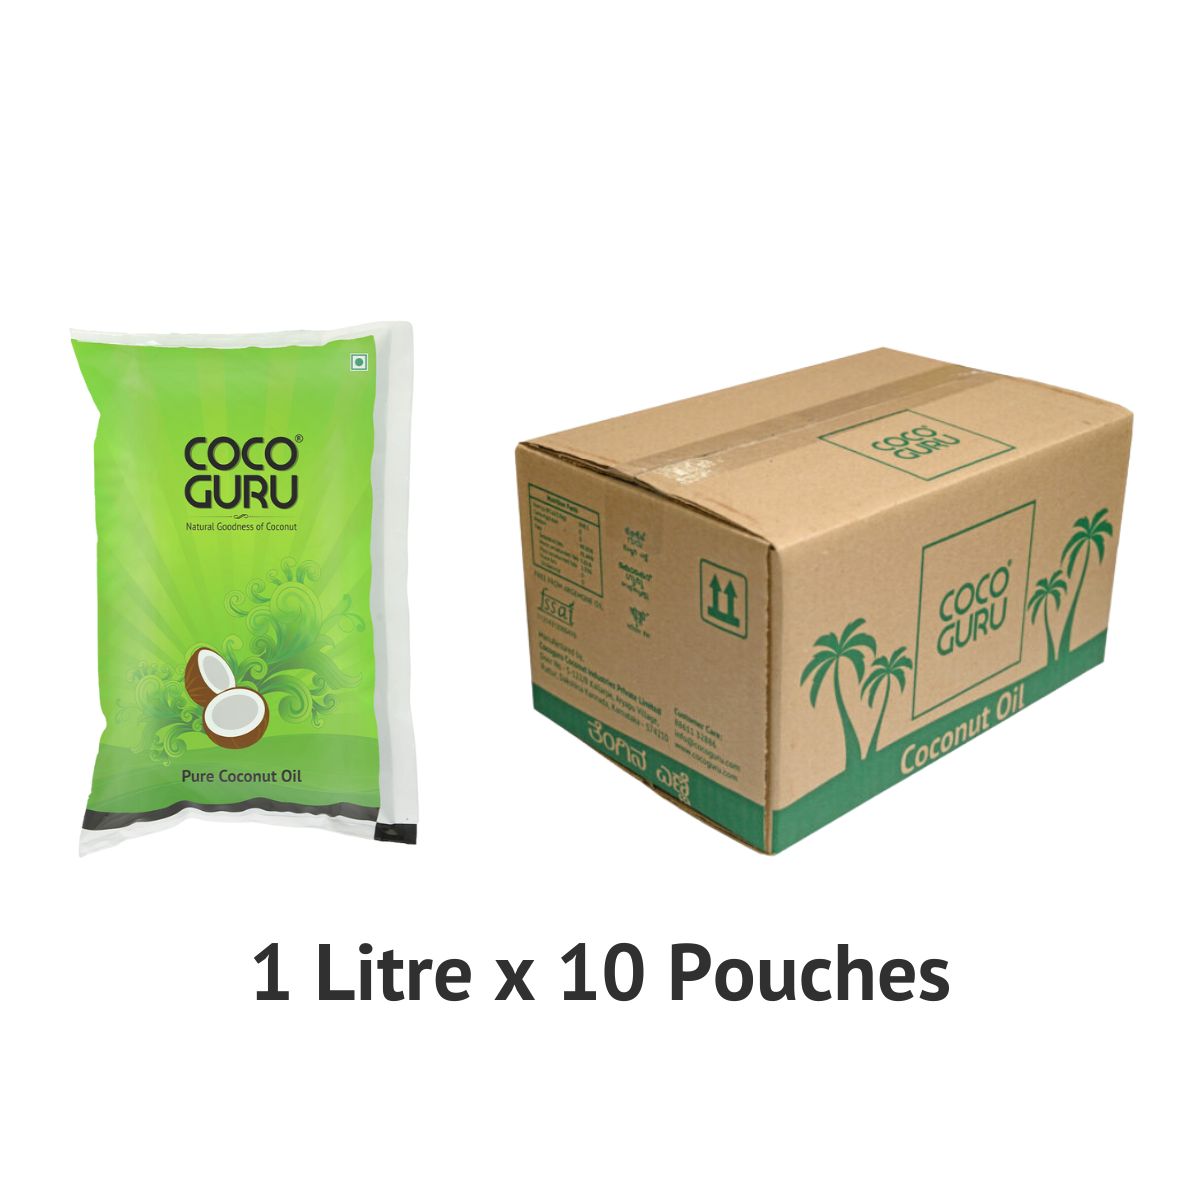 Roasted Coconut Oil Pouch 1 Litre - 10 litres Box